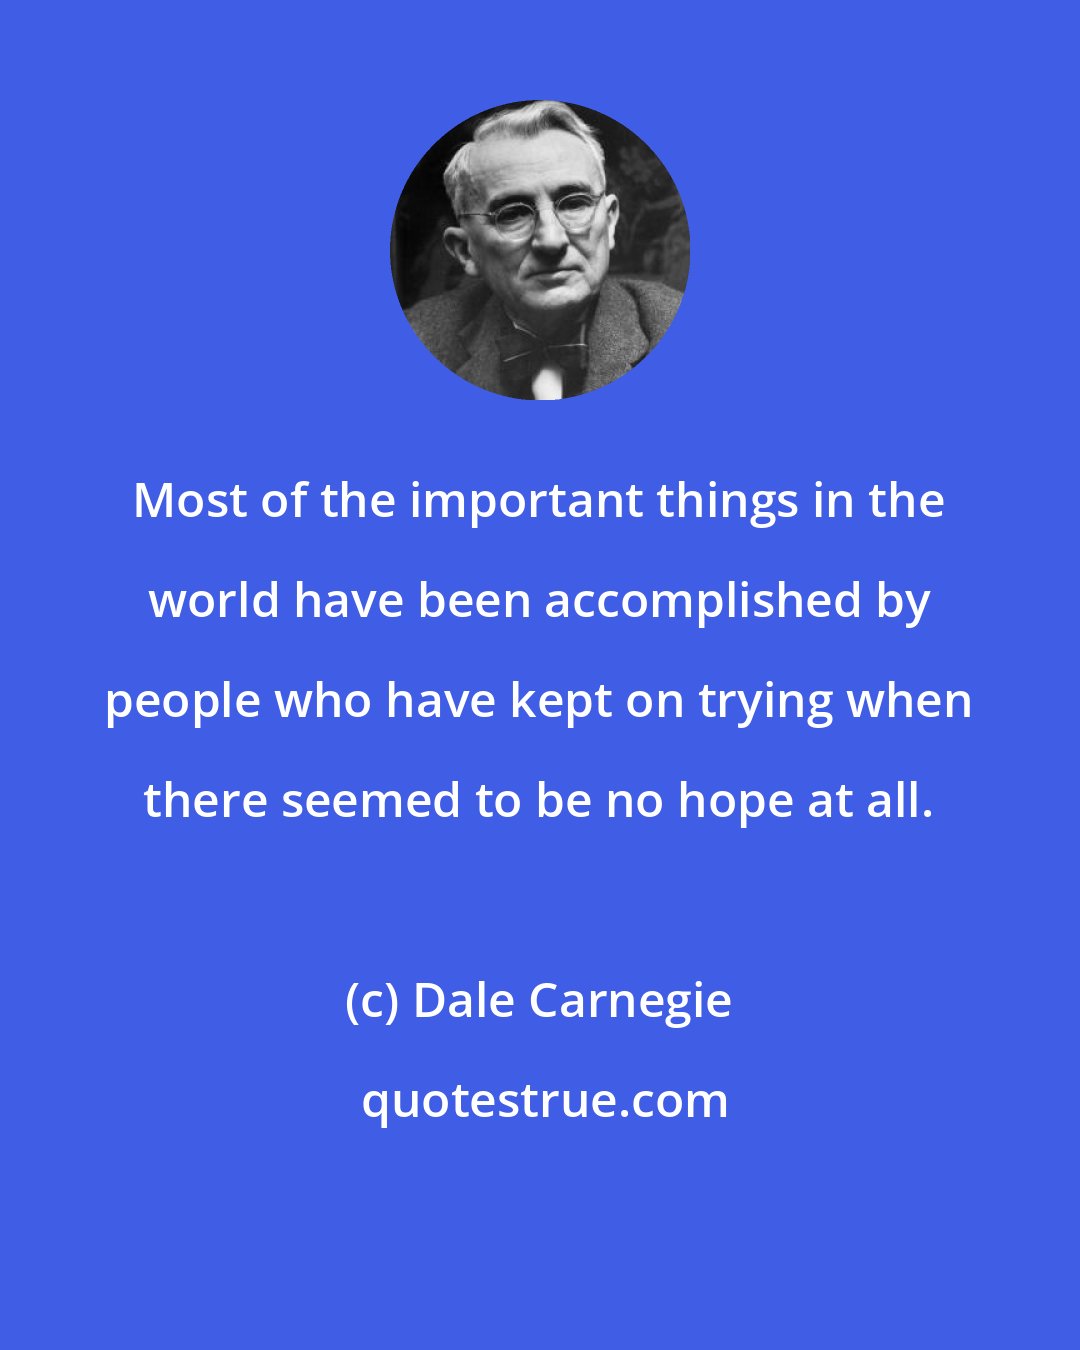 Dale Carnegie: Most of the important things in the world have been accomplished by people who have kept on trying when there seemed to be no hope at all.